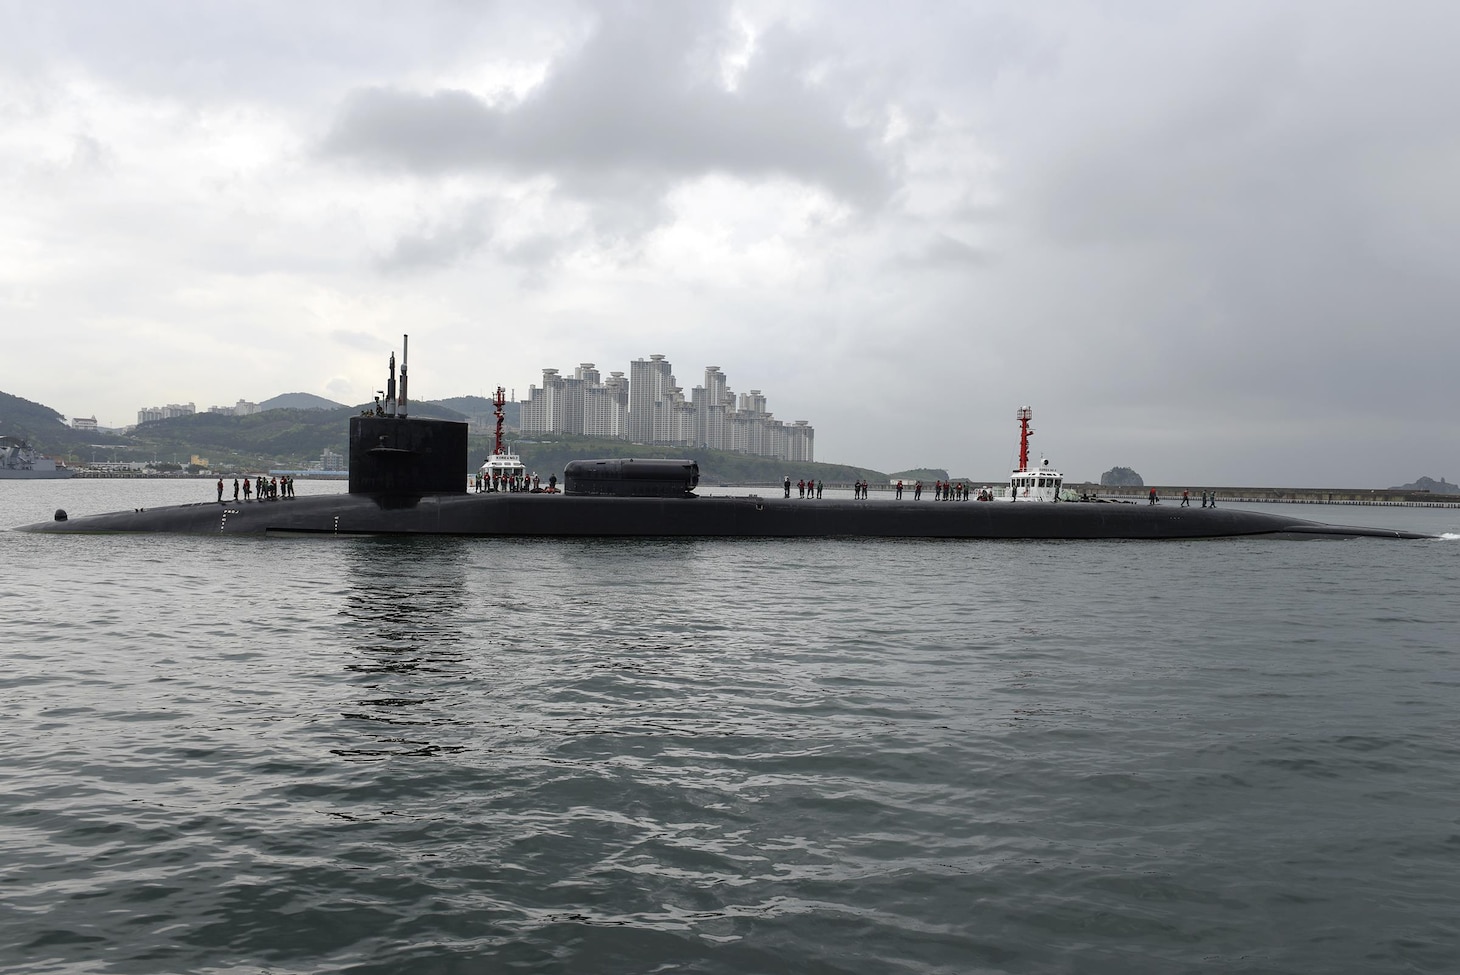 170425-N-WT427-002 BUSAN, Republic of Korea (April 24, 2017) 
The Ohio-class guided-missile submarine USS Michigan (SSGN 727) arrives in Busan for a regularly scheduled port visit while conducting routine patrols throughout the Western Pacific. Michigan is the second submarine of the Ohio-class  of ballistic missile submarines and guided missile submarines, and the third U.S. ship to bear the name. Michigan is home-ported in Bremerton, Wash. and is forwarded deployed from Guam.  (U.S. Navy photo by Mass Communication Specialist 2nd Class Jermaine Ralliford)